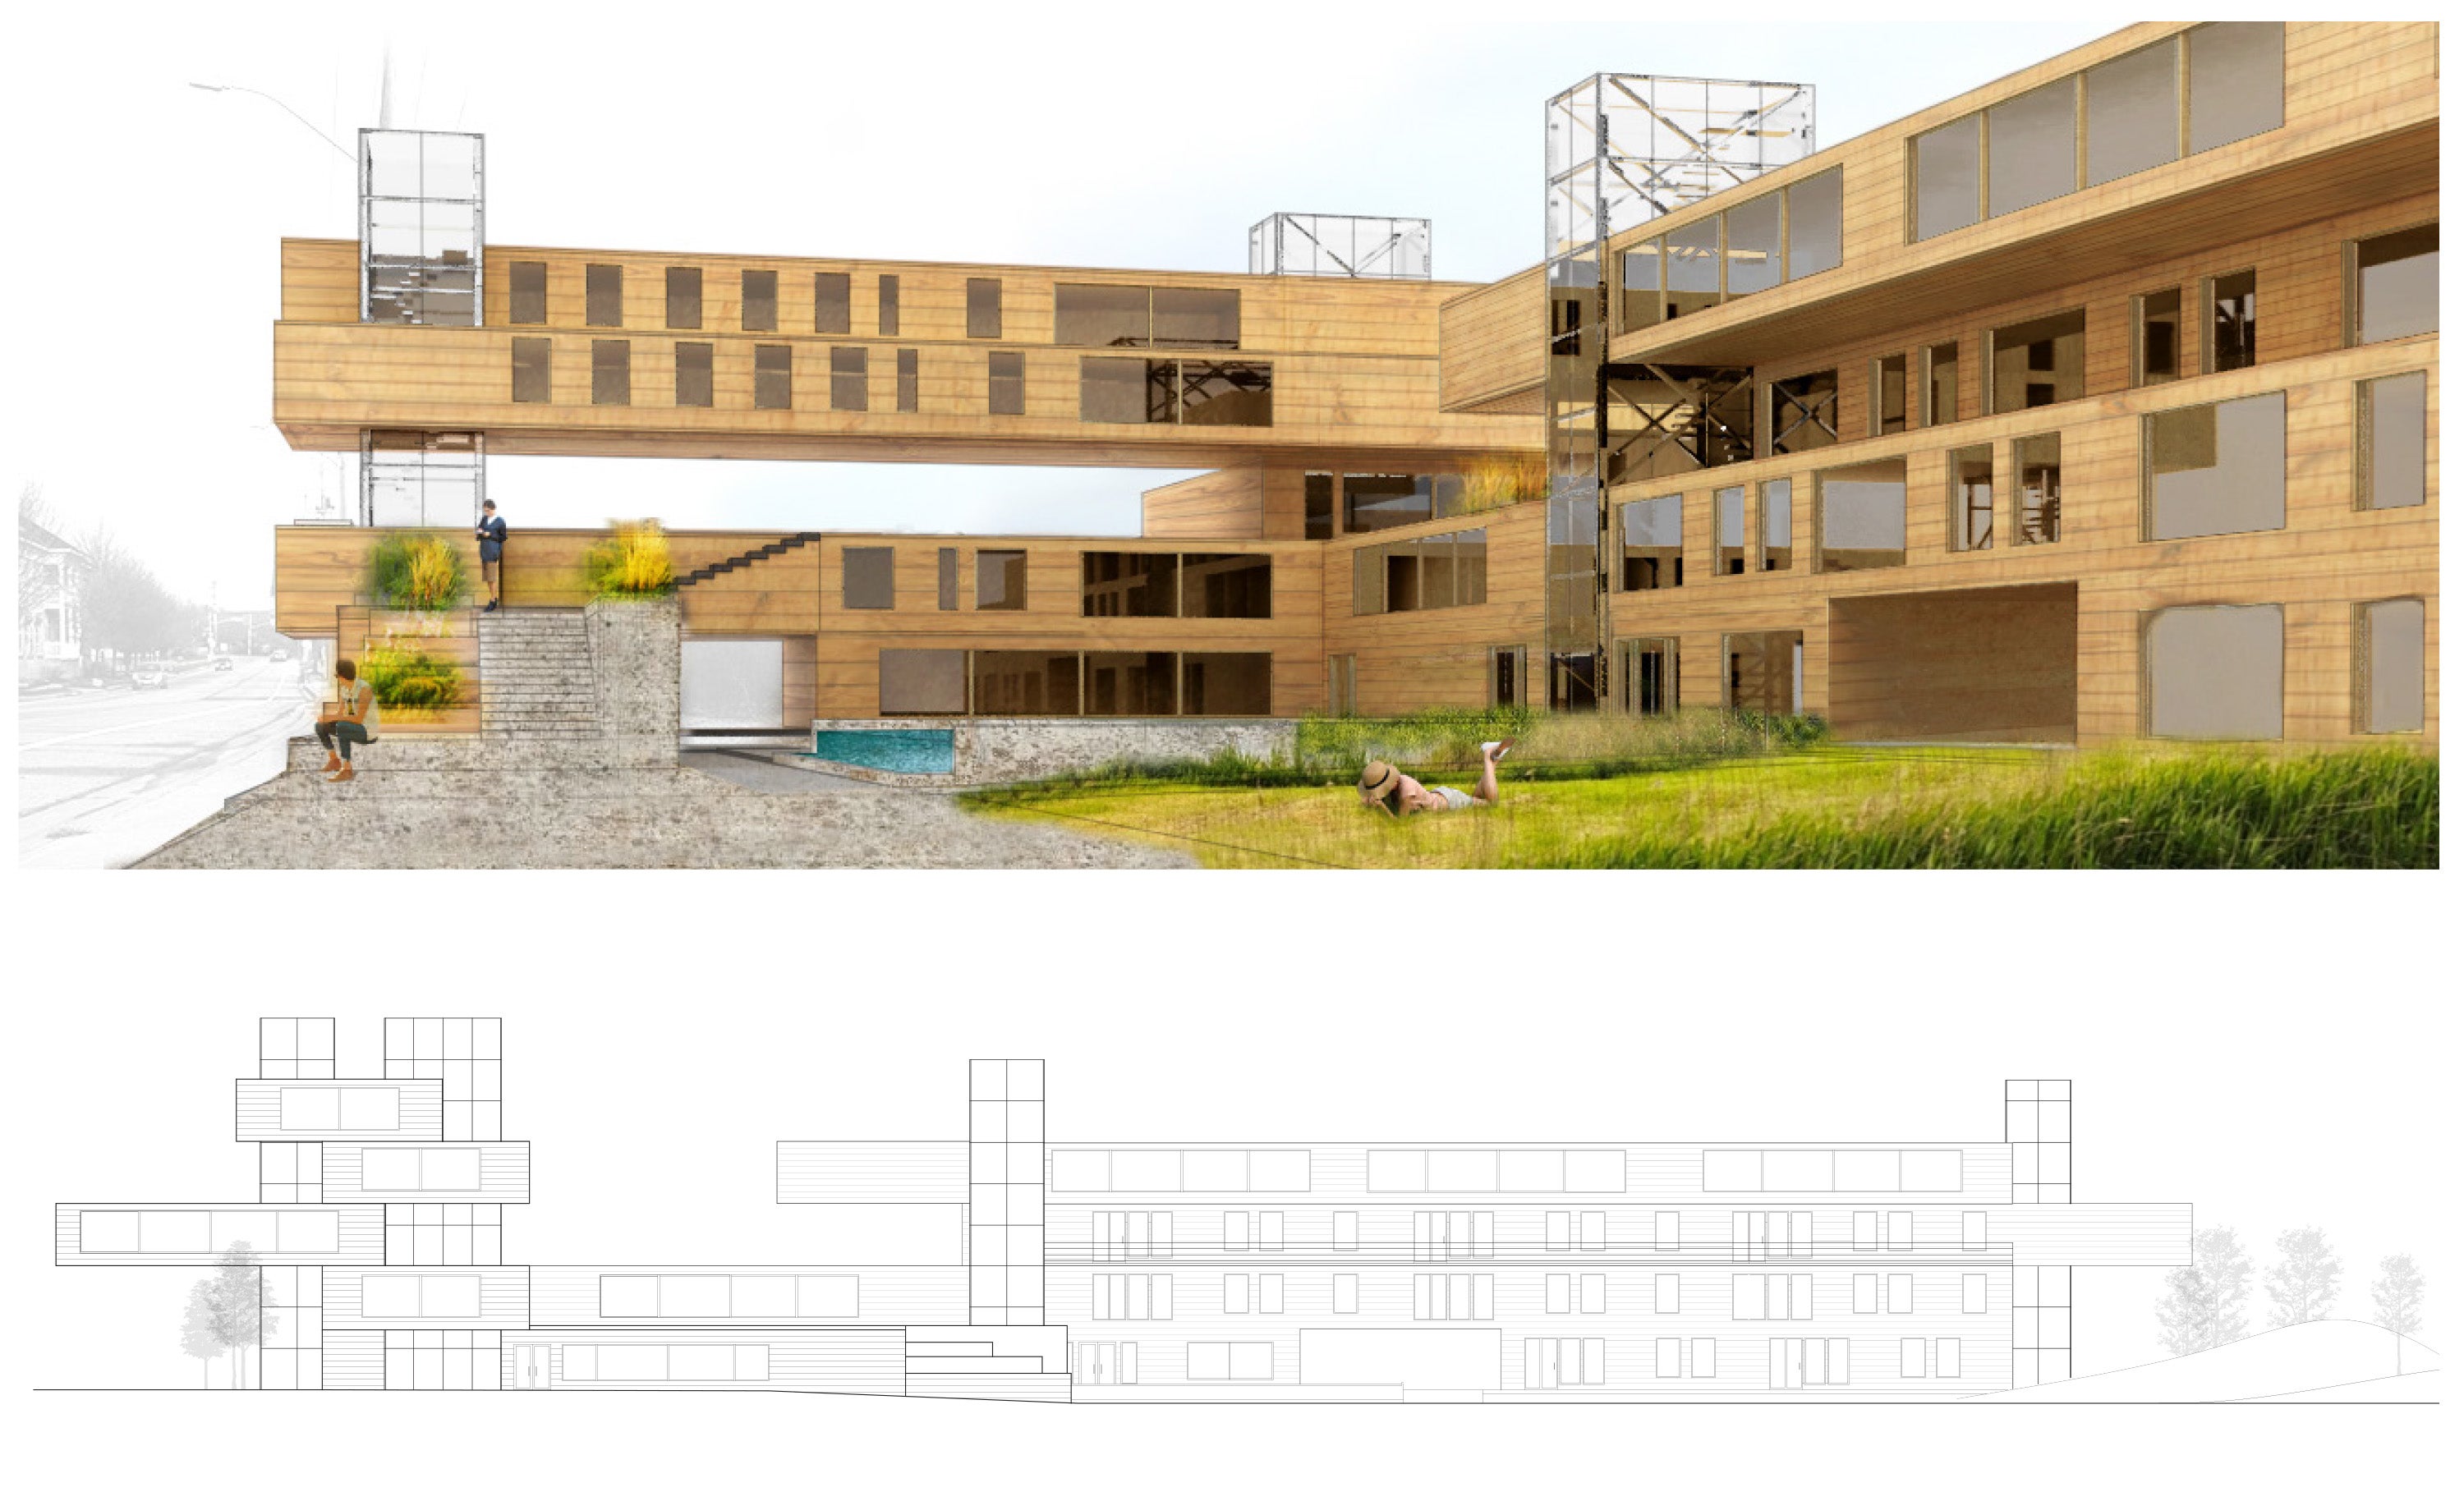 A perspective rendering of the building from the front entrance. The form of the building is rectangular with cantilevers.